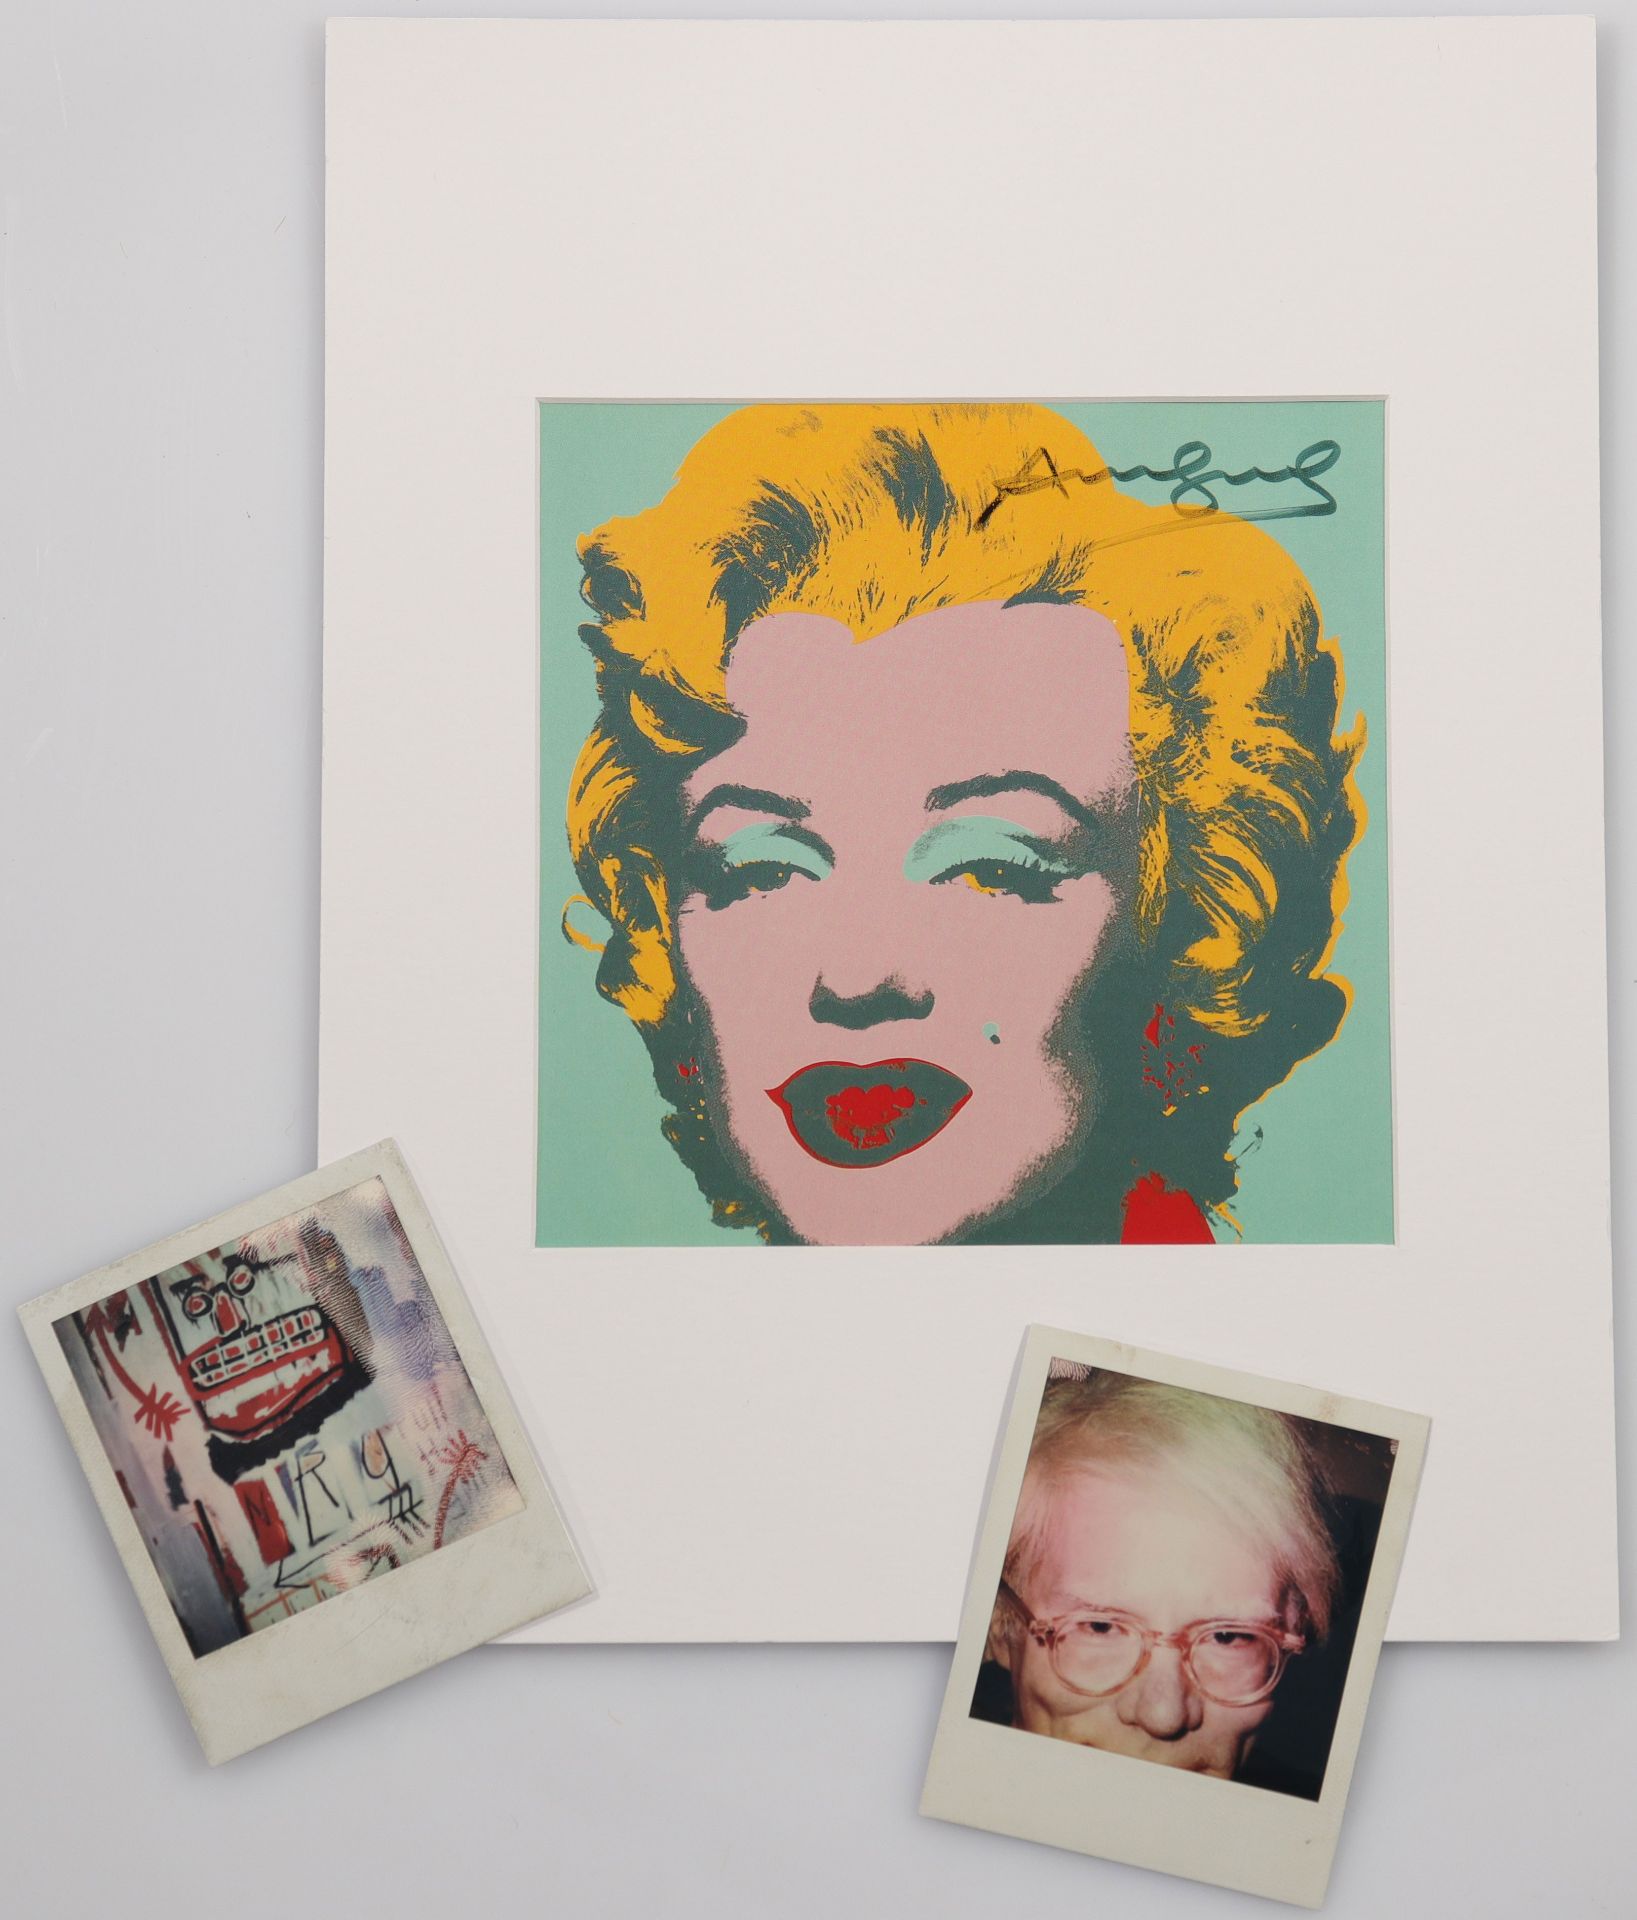 Andy Warhol - Marylin Monroe Hand signed by Andy Warhol in black marker on the front of an offset